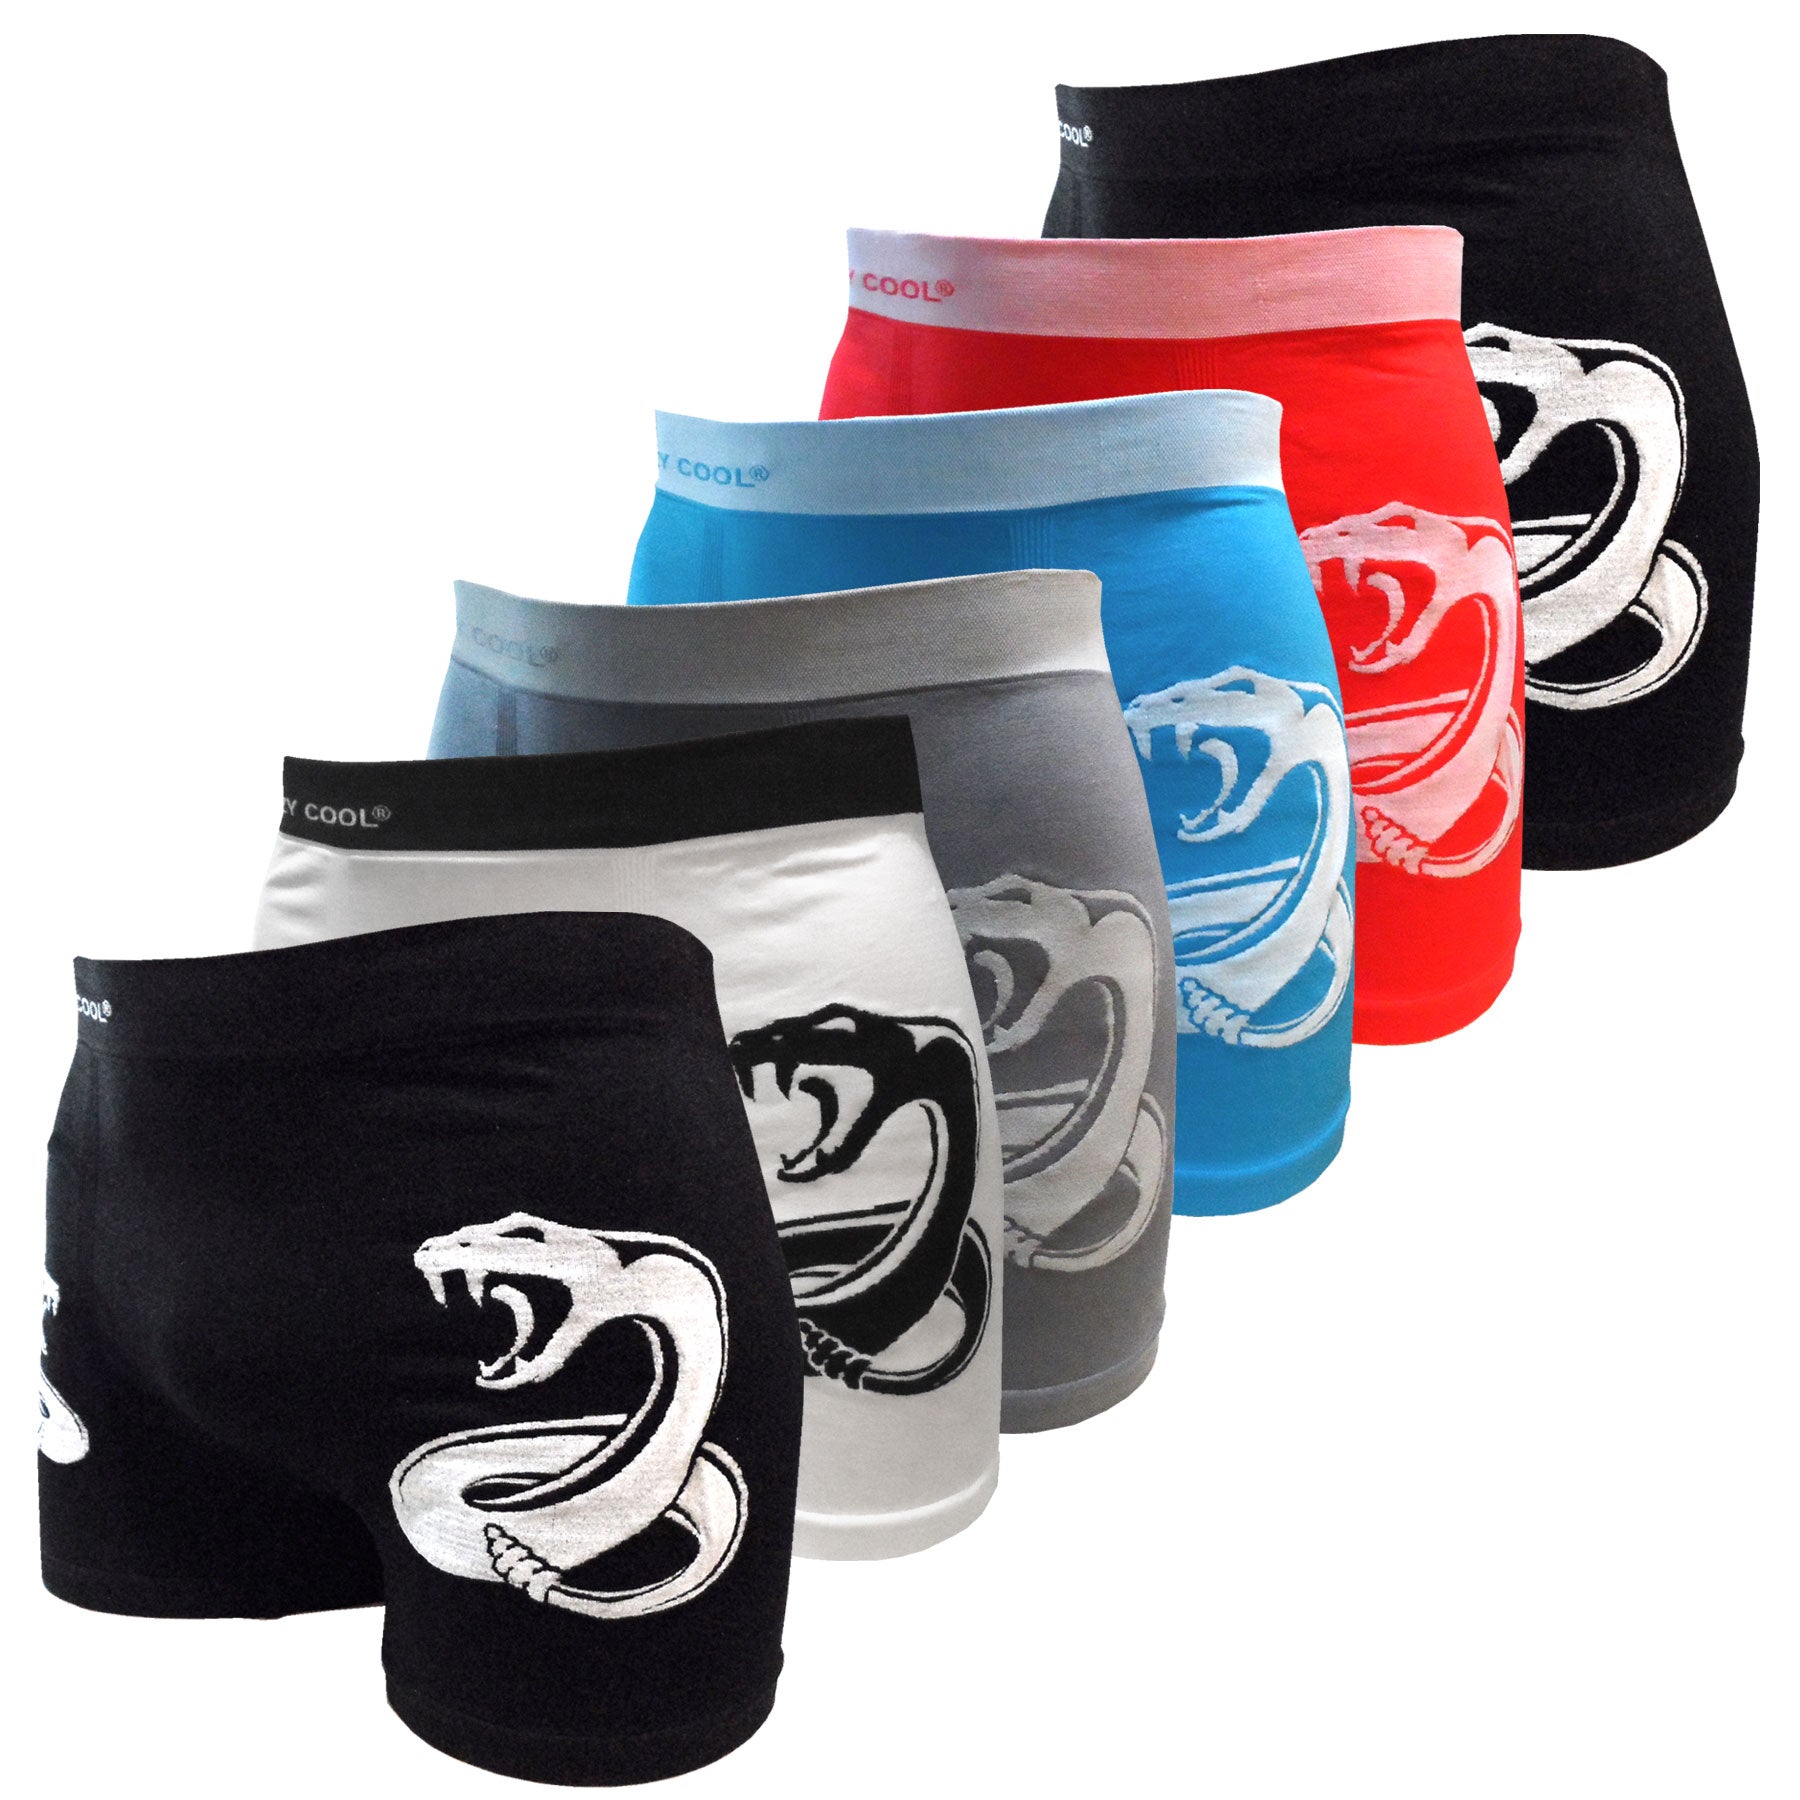 Coca-Cola Ice Cold Men's Crazy Boxer Briefs in Novelty Packaging